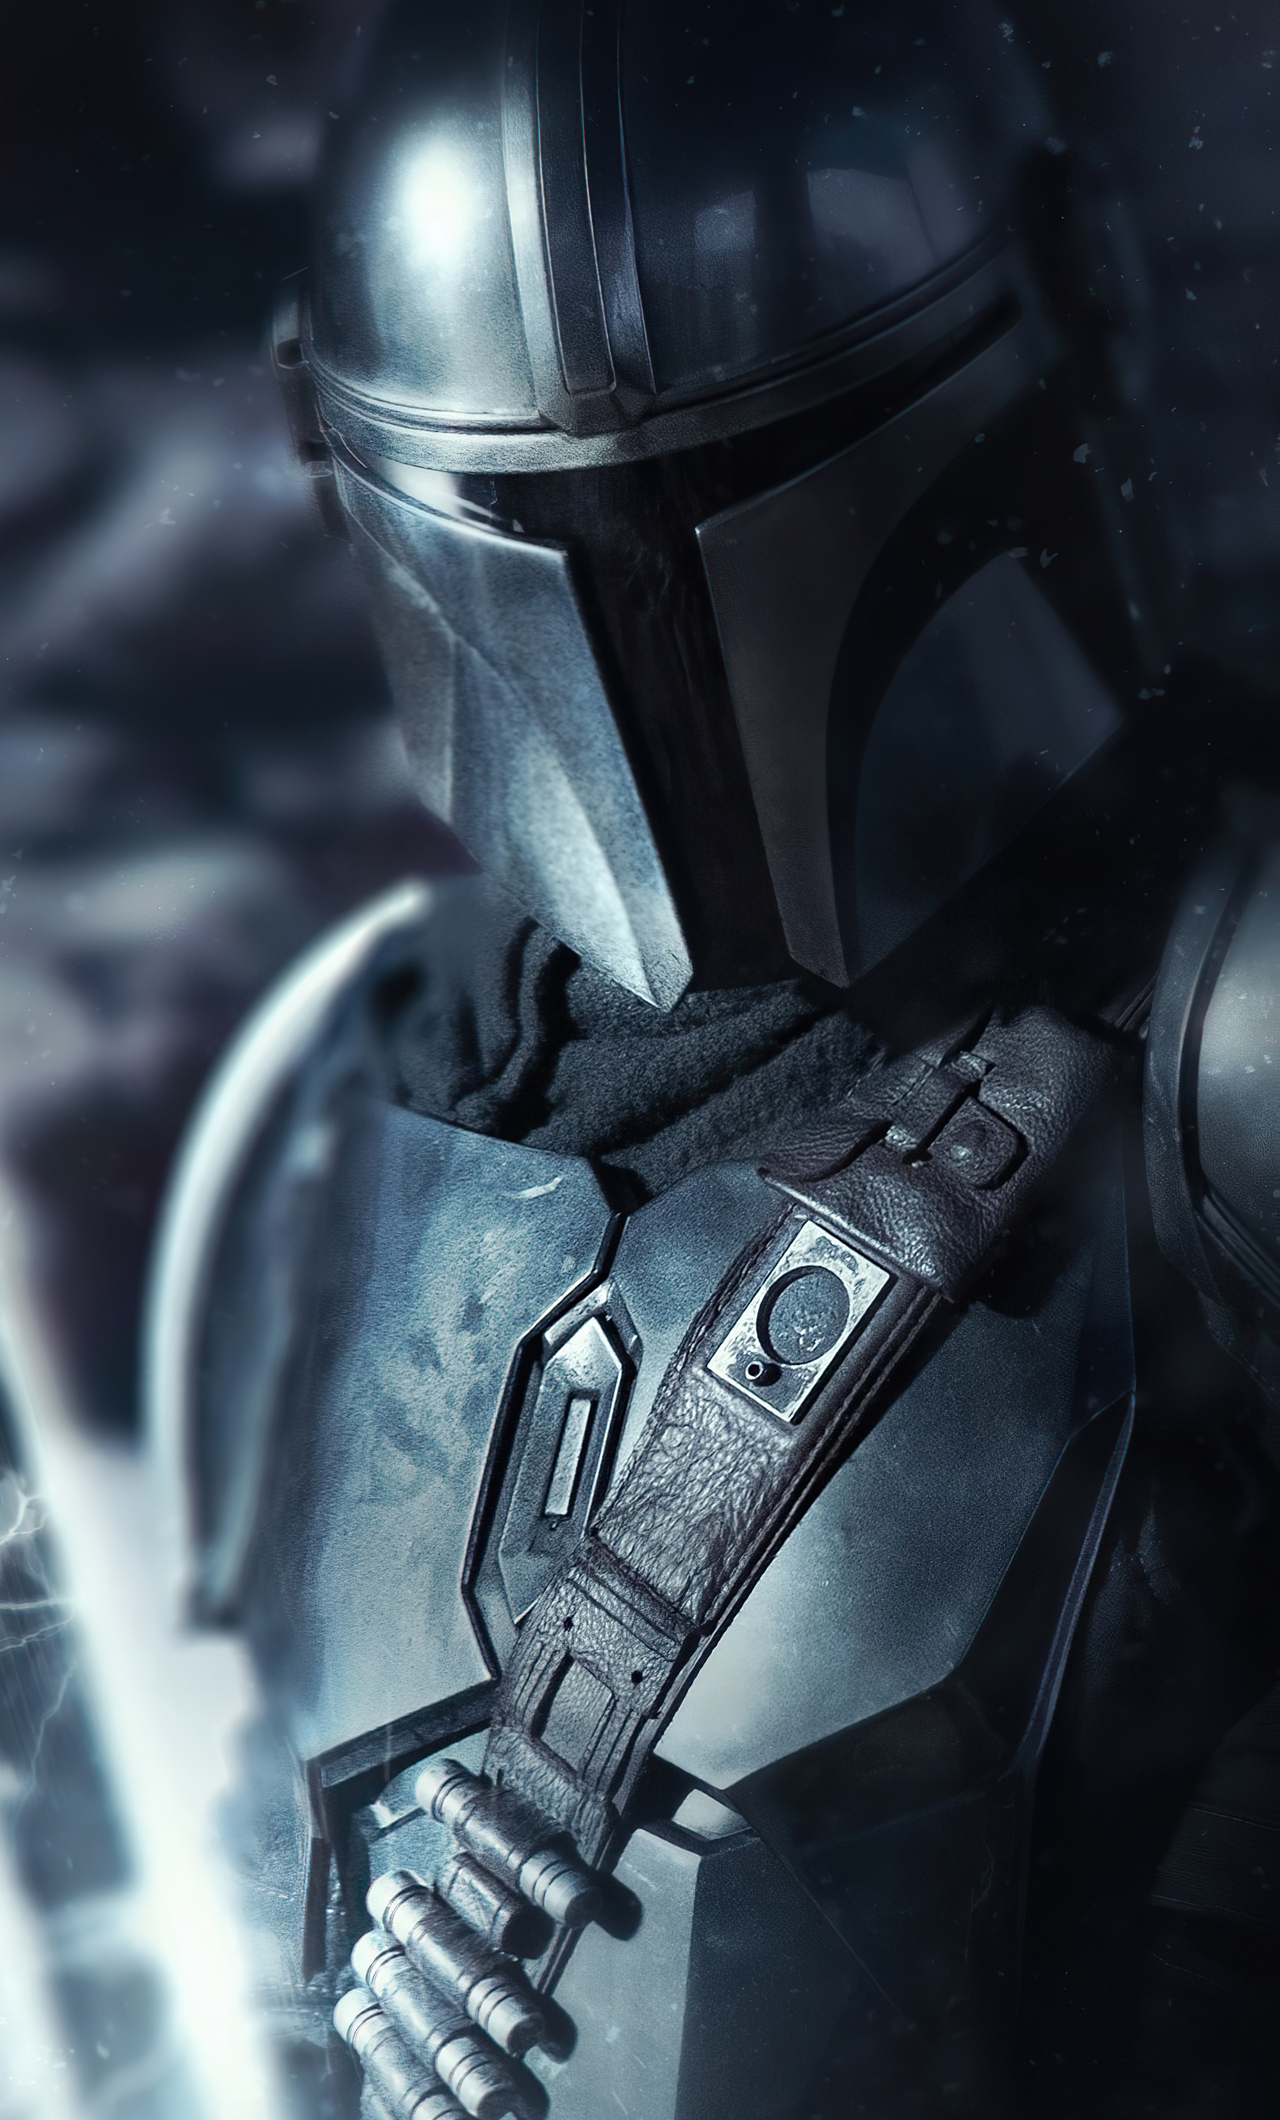 X the mandalorian season new iphone hd k wallpapers images backgrounds photos and pictures